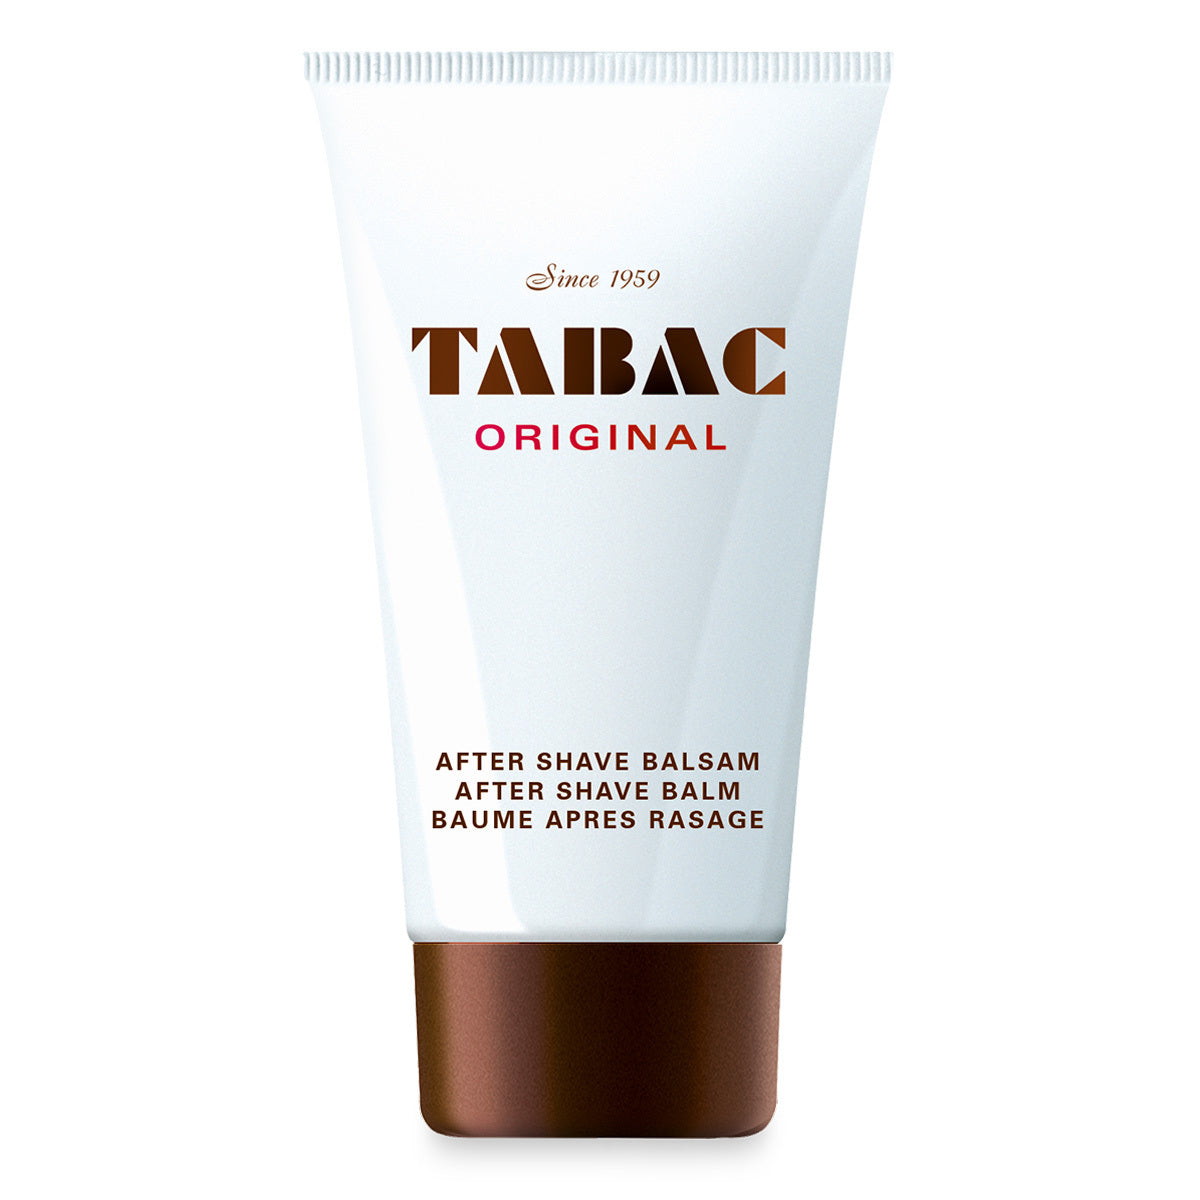 Primary image of Tabac Original After Shave Balm